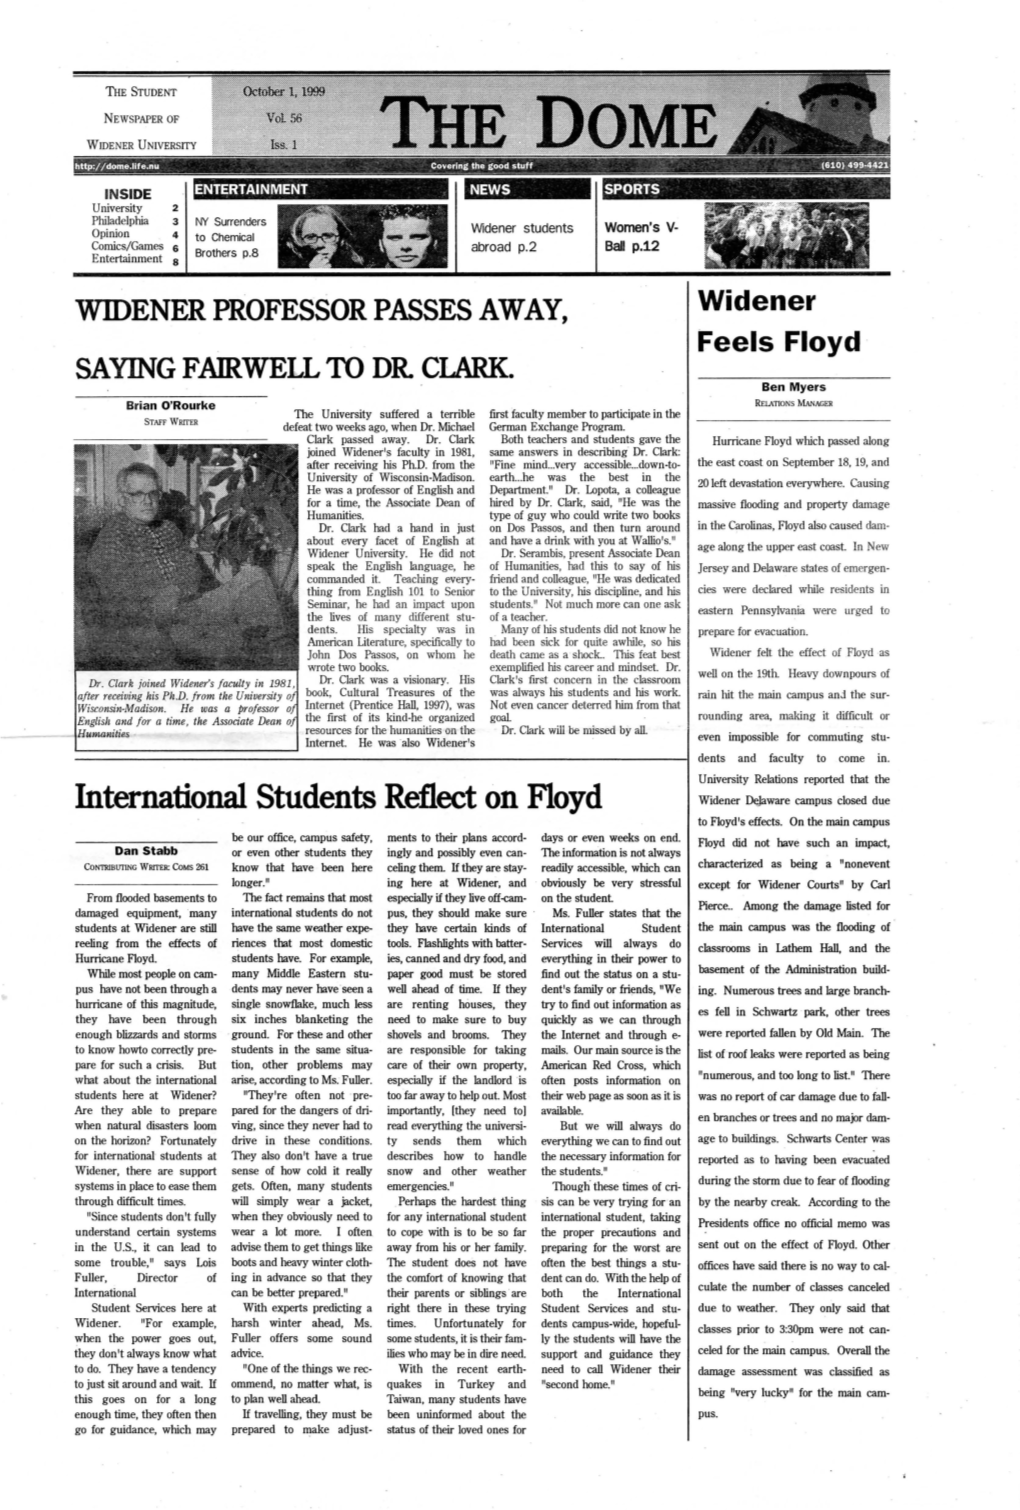 International Students Reflect on Floyd Widener ~Ware Campus Closed Due to Floyd's Effects